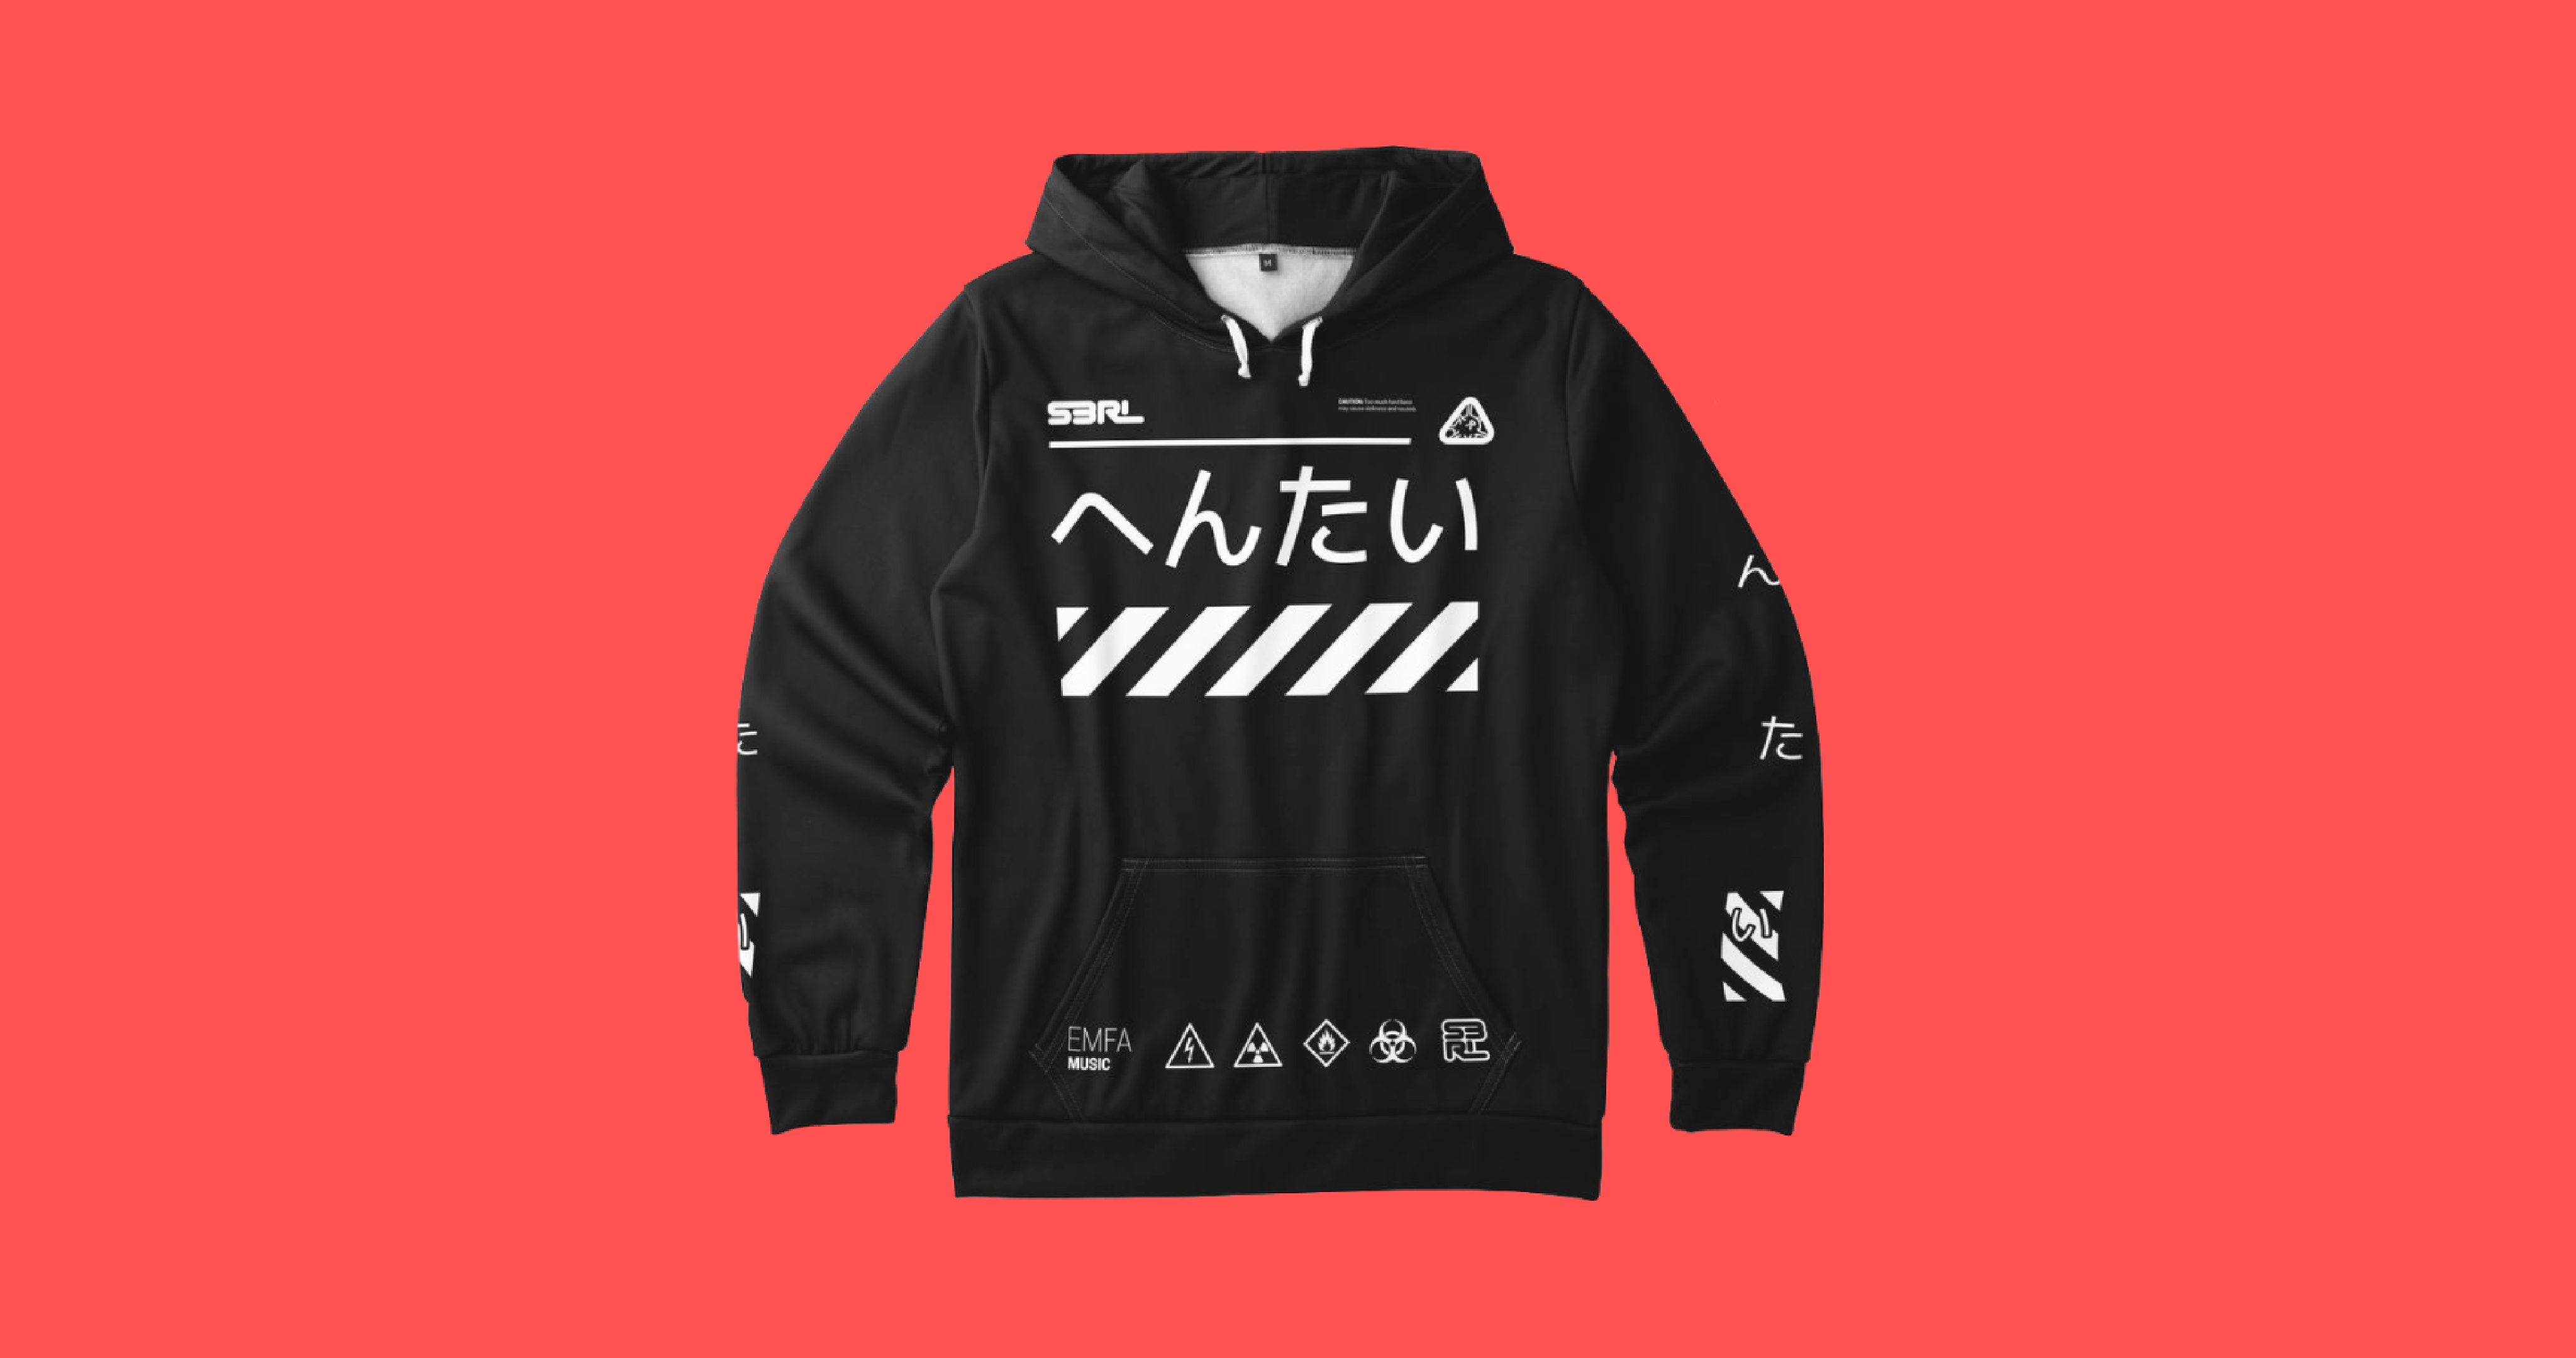 A realistic mockup of the front-side hoodie graphics.